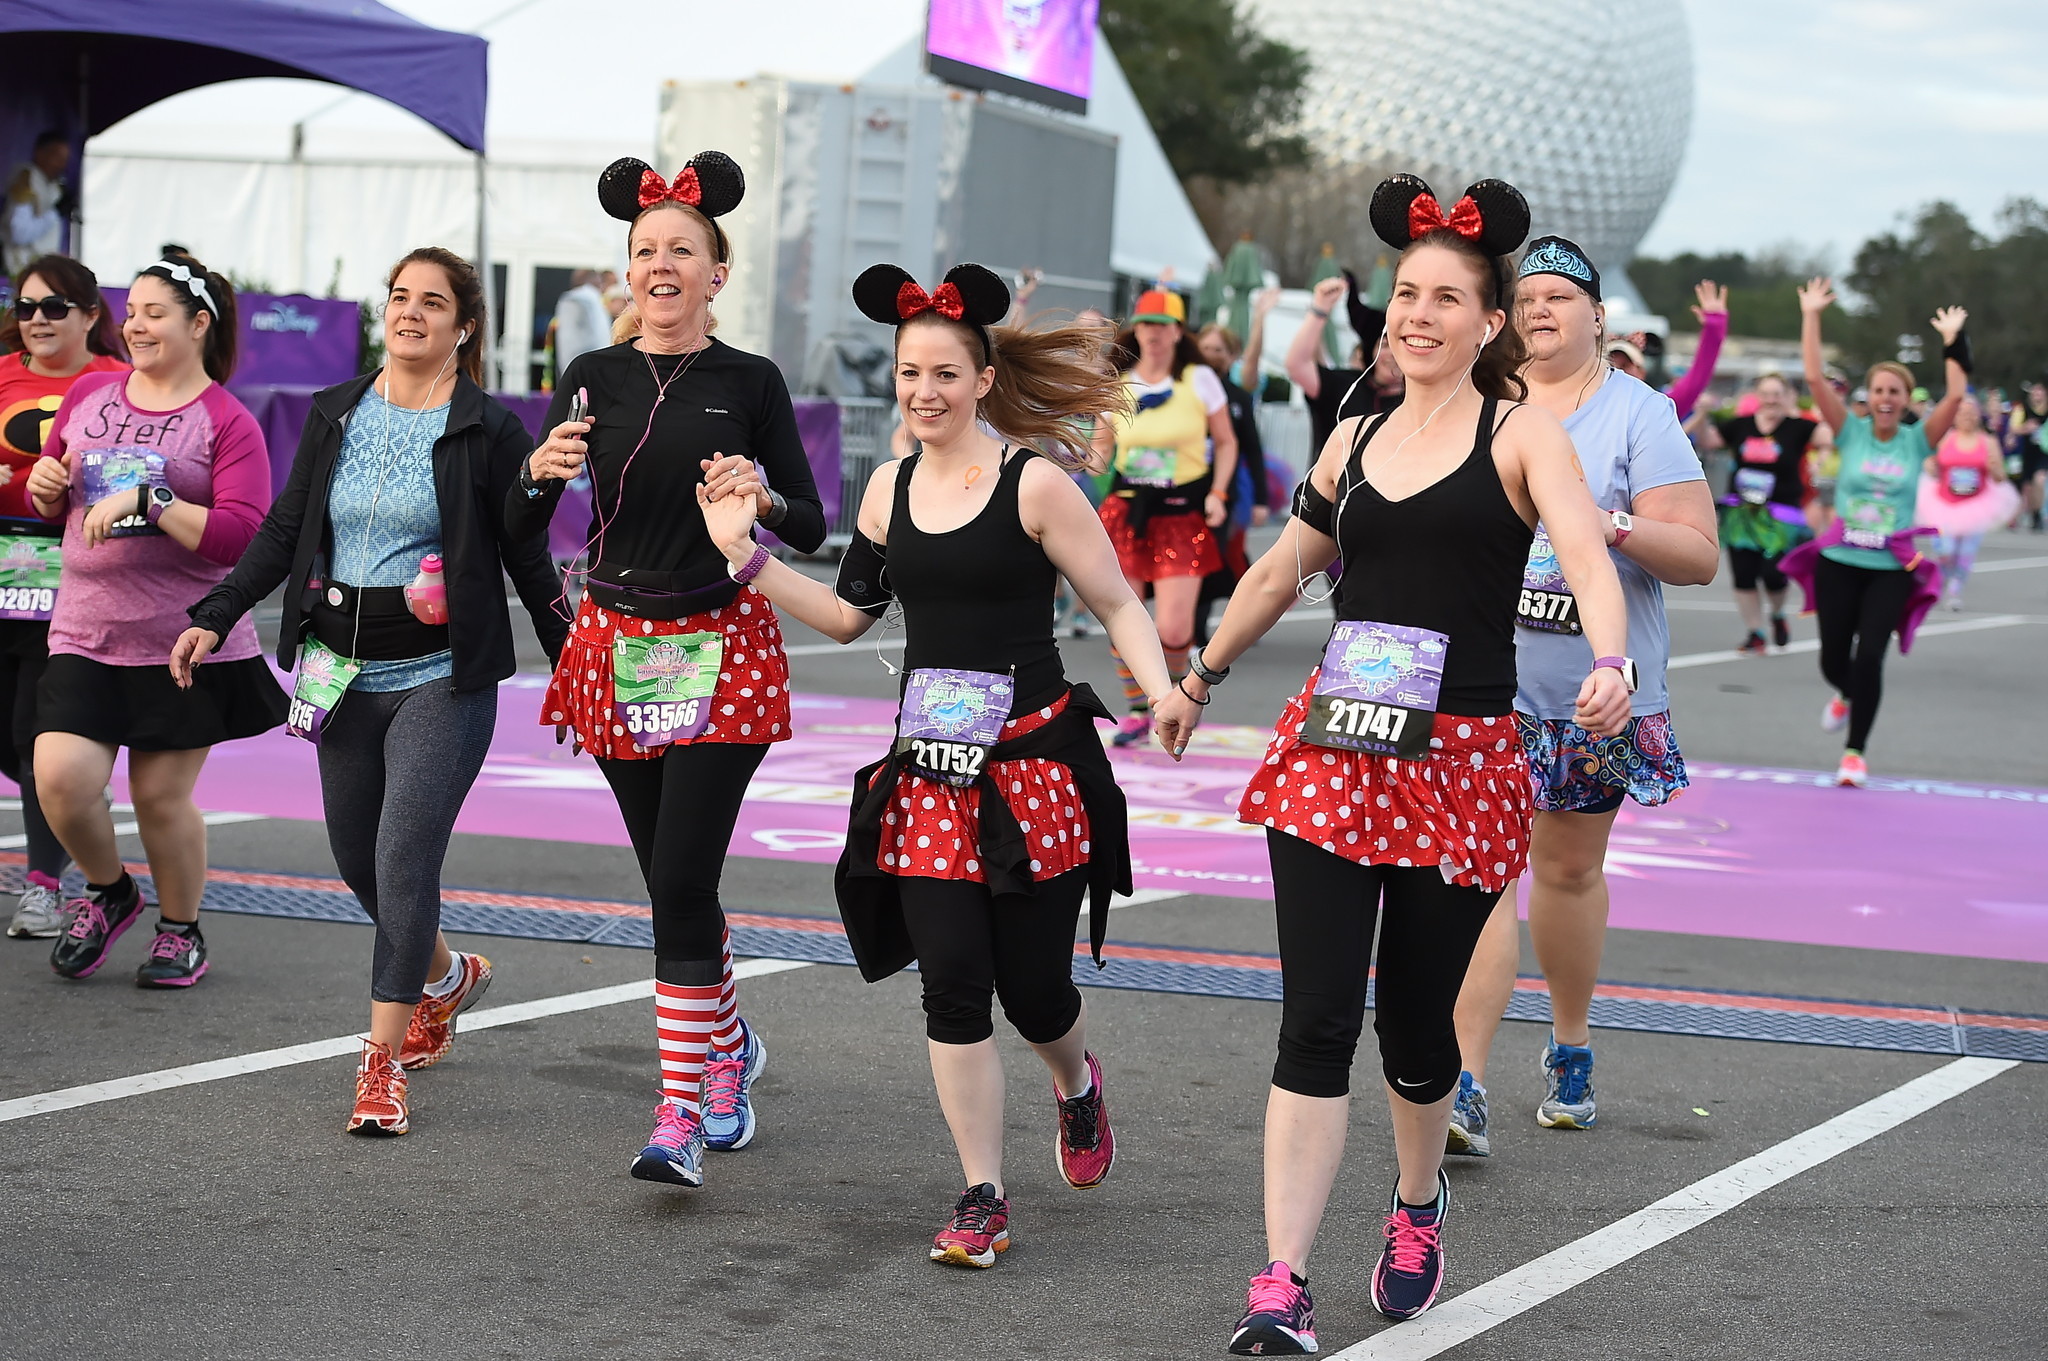 At Disney, running a race is all about the costume